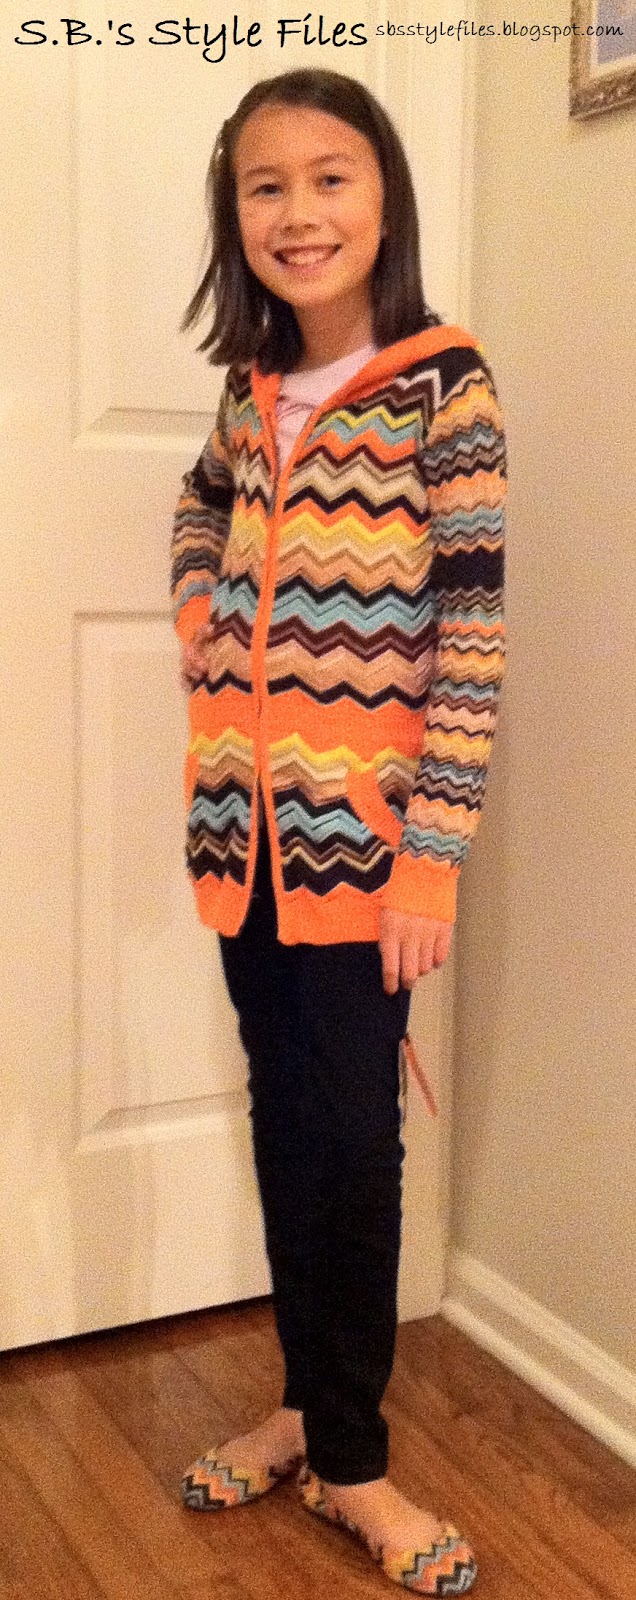 S.B.'s Style Files: Missoni for Target